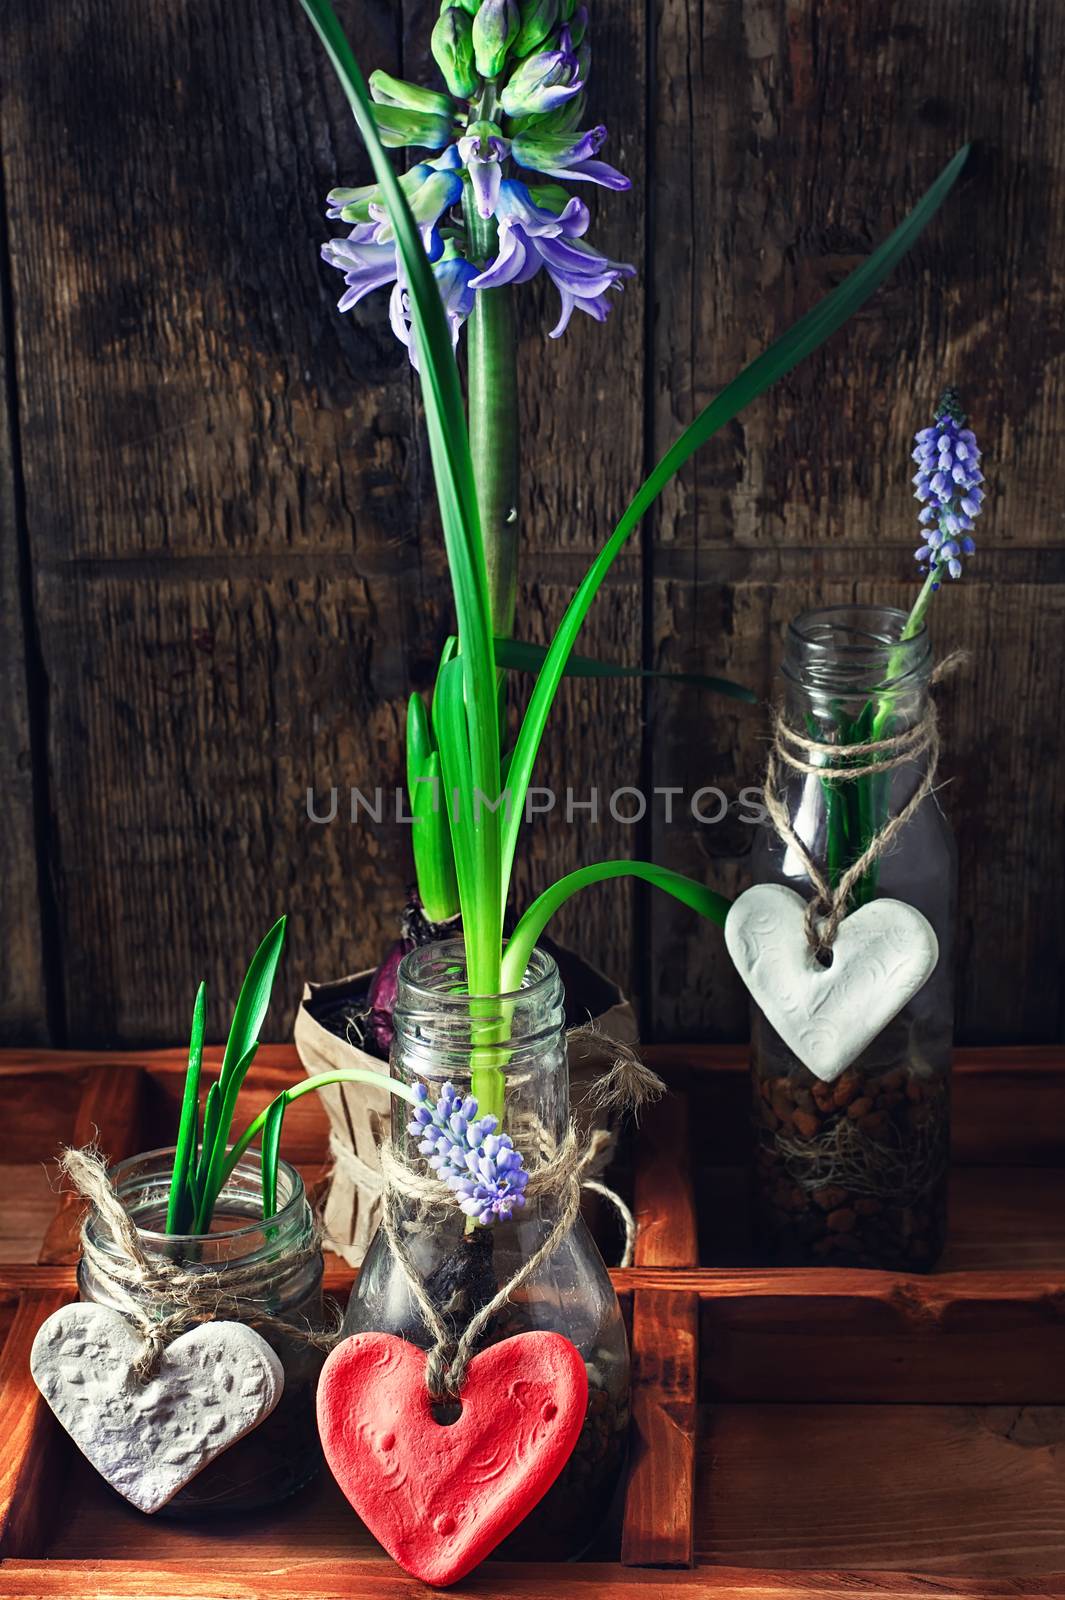 Hyacinth flowers and sprouts in glass jars in box